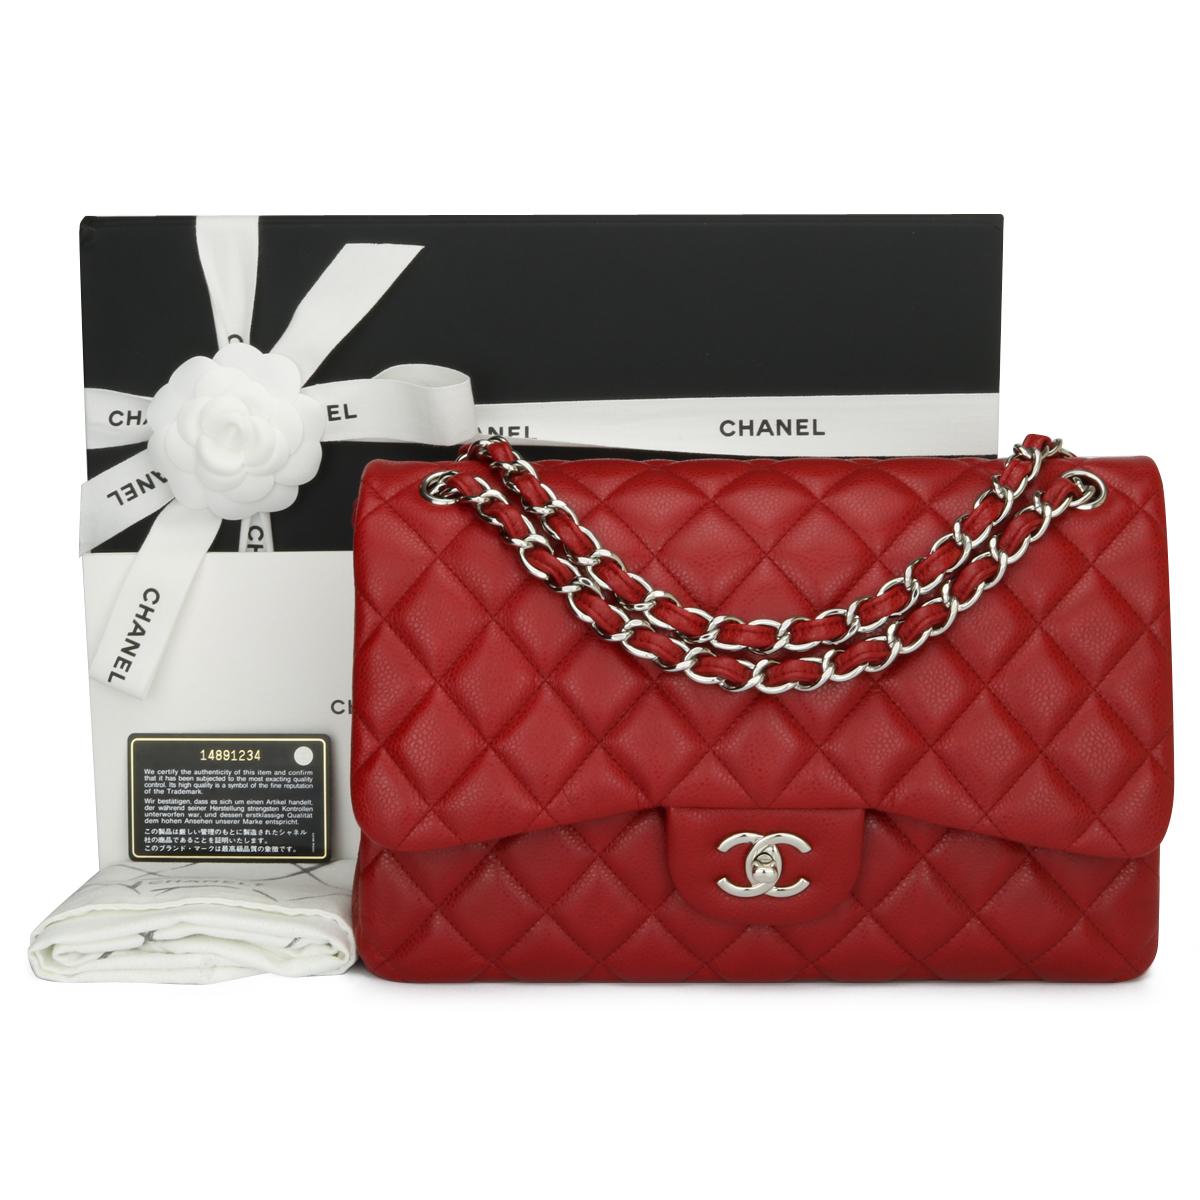 Authentic CHANEL Classic Double Flap Jumbo Bag Rich Red Caviar with Silver Hardware 2010.

This stunning bag is in mint-pristine condition, the bag still holds its original shape, and the hardware is still very shiny.

Exterior Condition: Mint